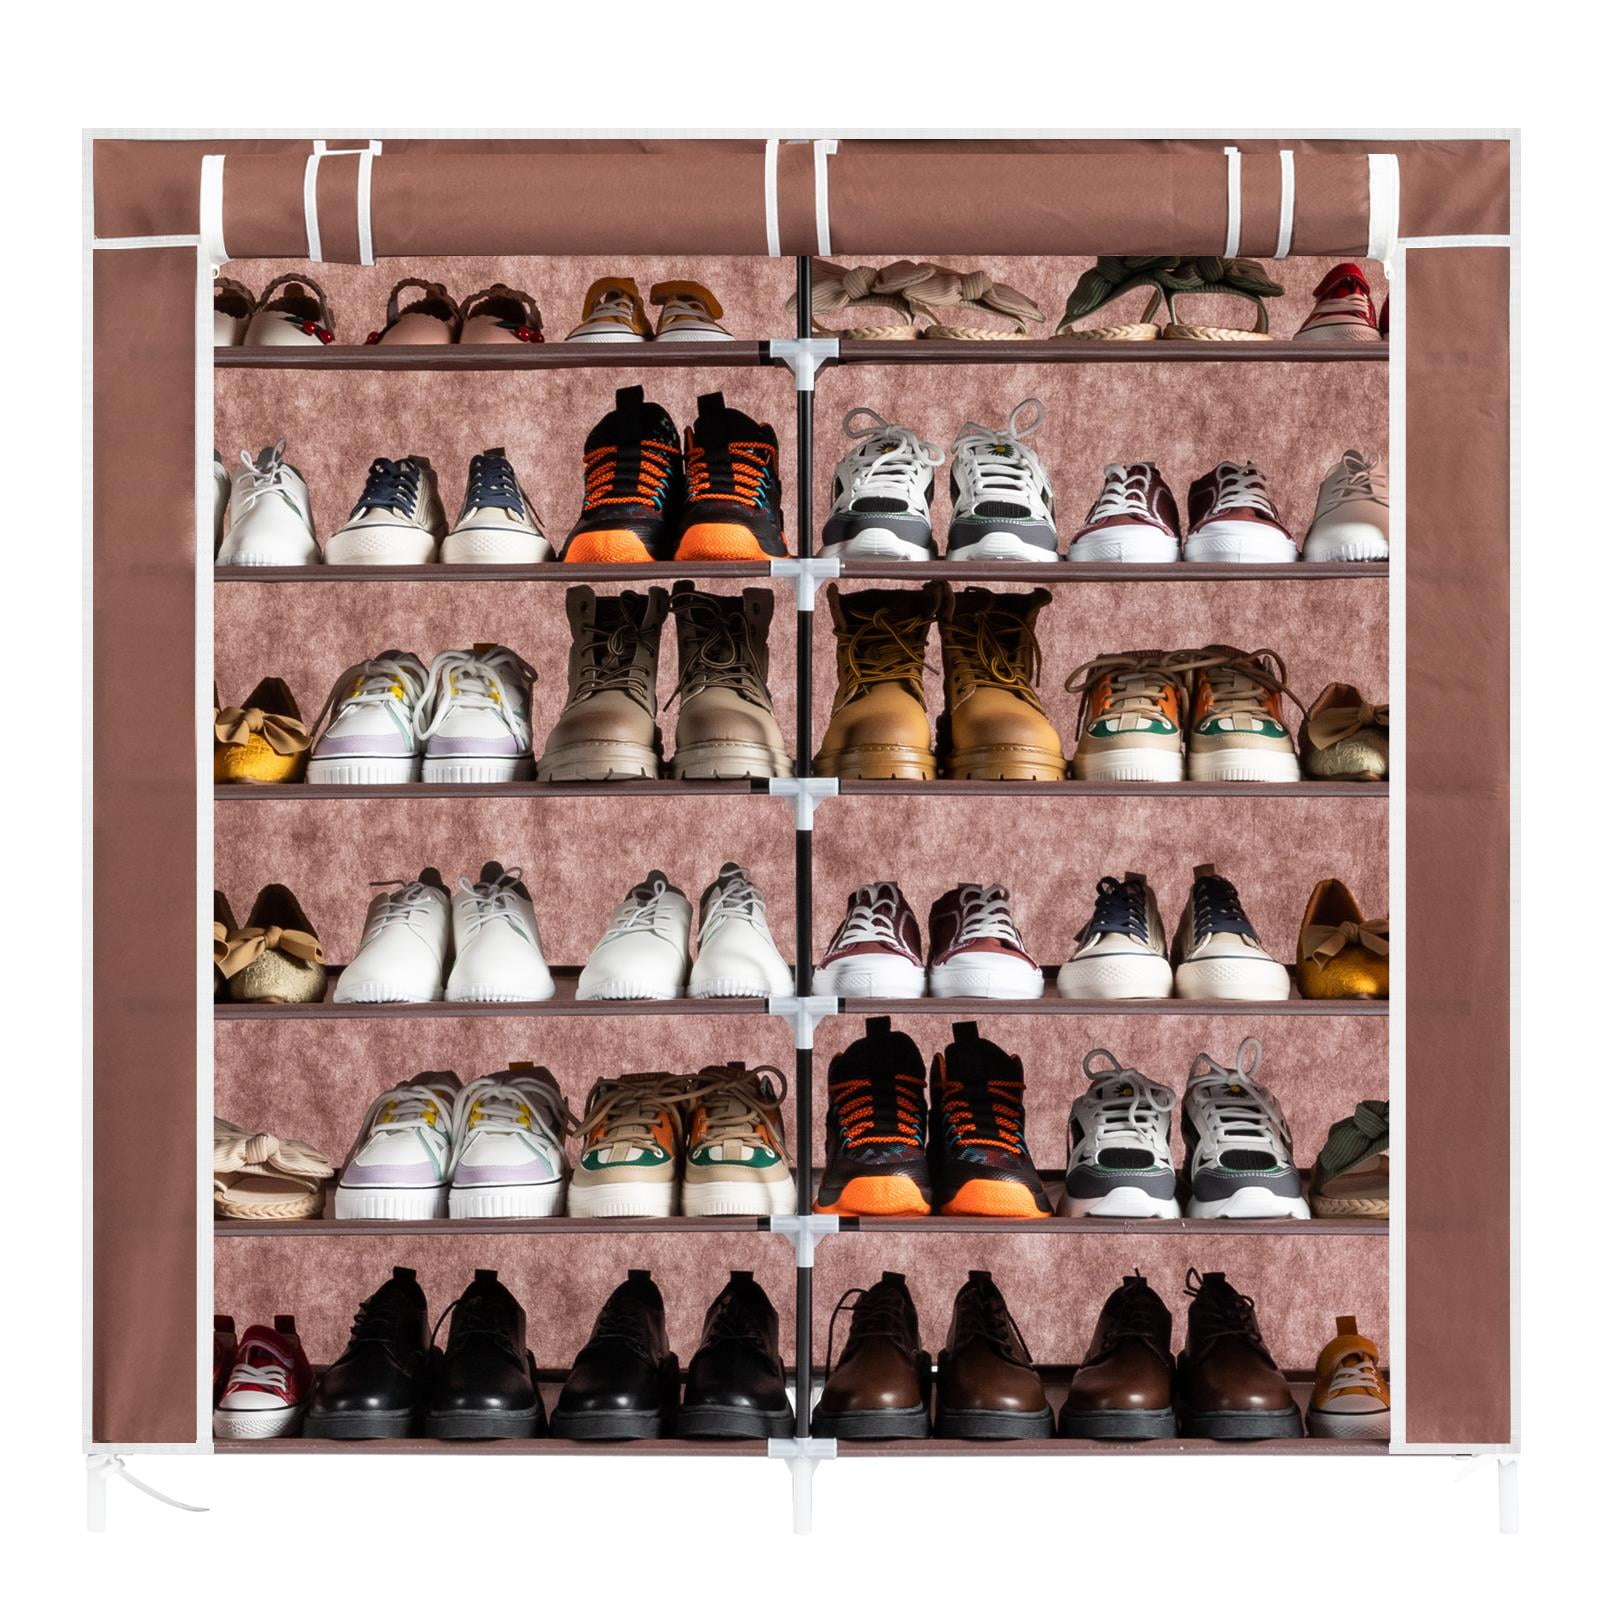 Ktaxon 6-Tier Metal Sturdy Shoe Rack Shelf Shoe Tower Stand 30- Pairs Shoe  Storage Cabinet Organizer for Closet Entryway Bedroom Living Room Home,  Black Finish 